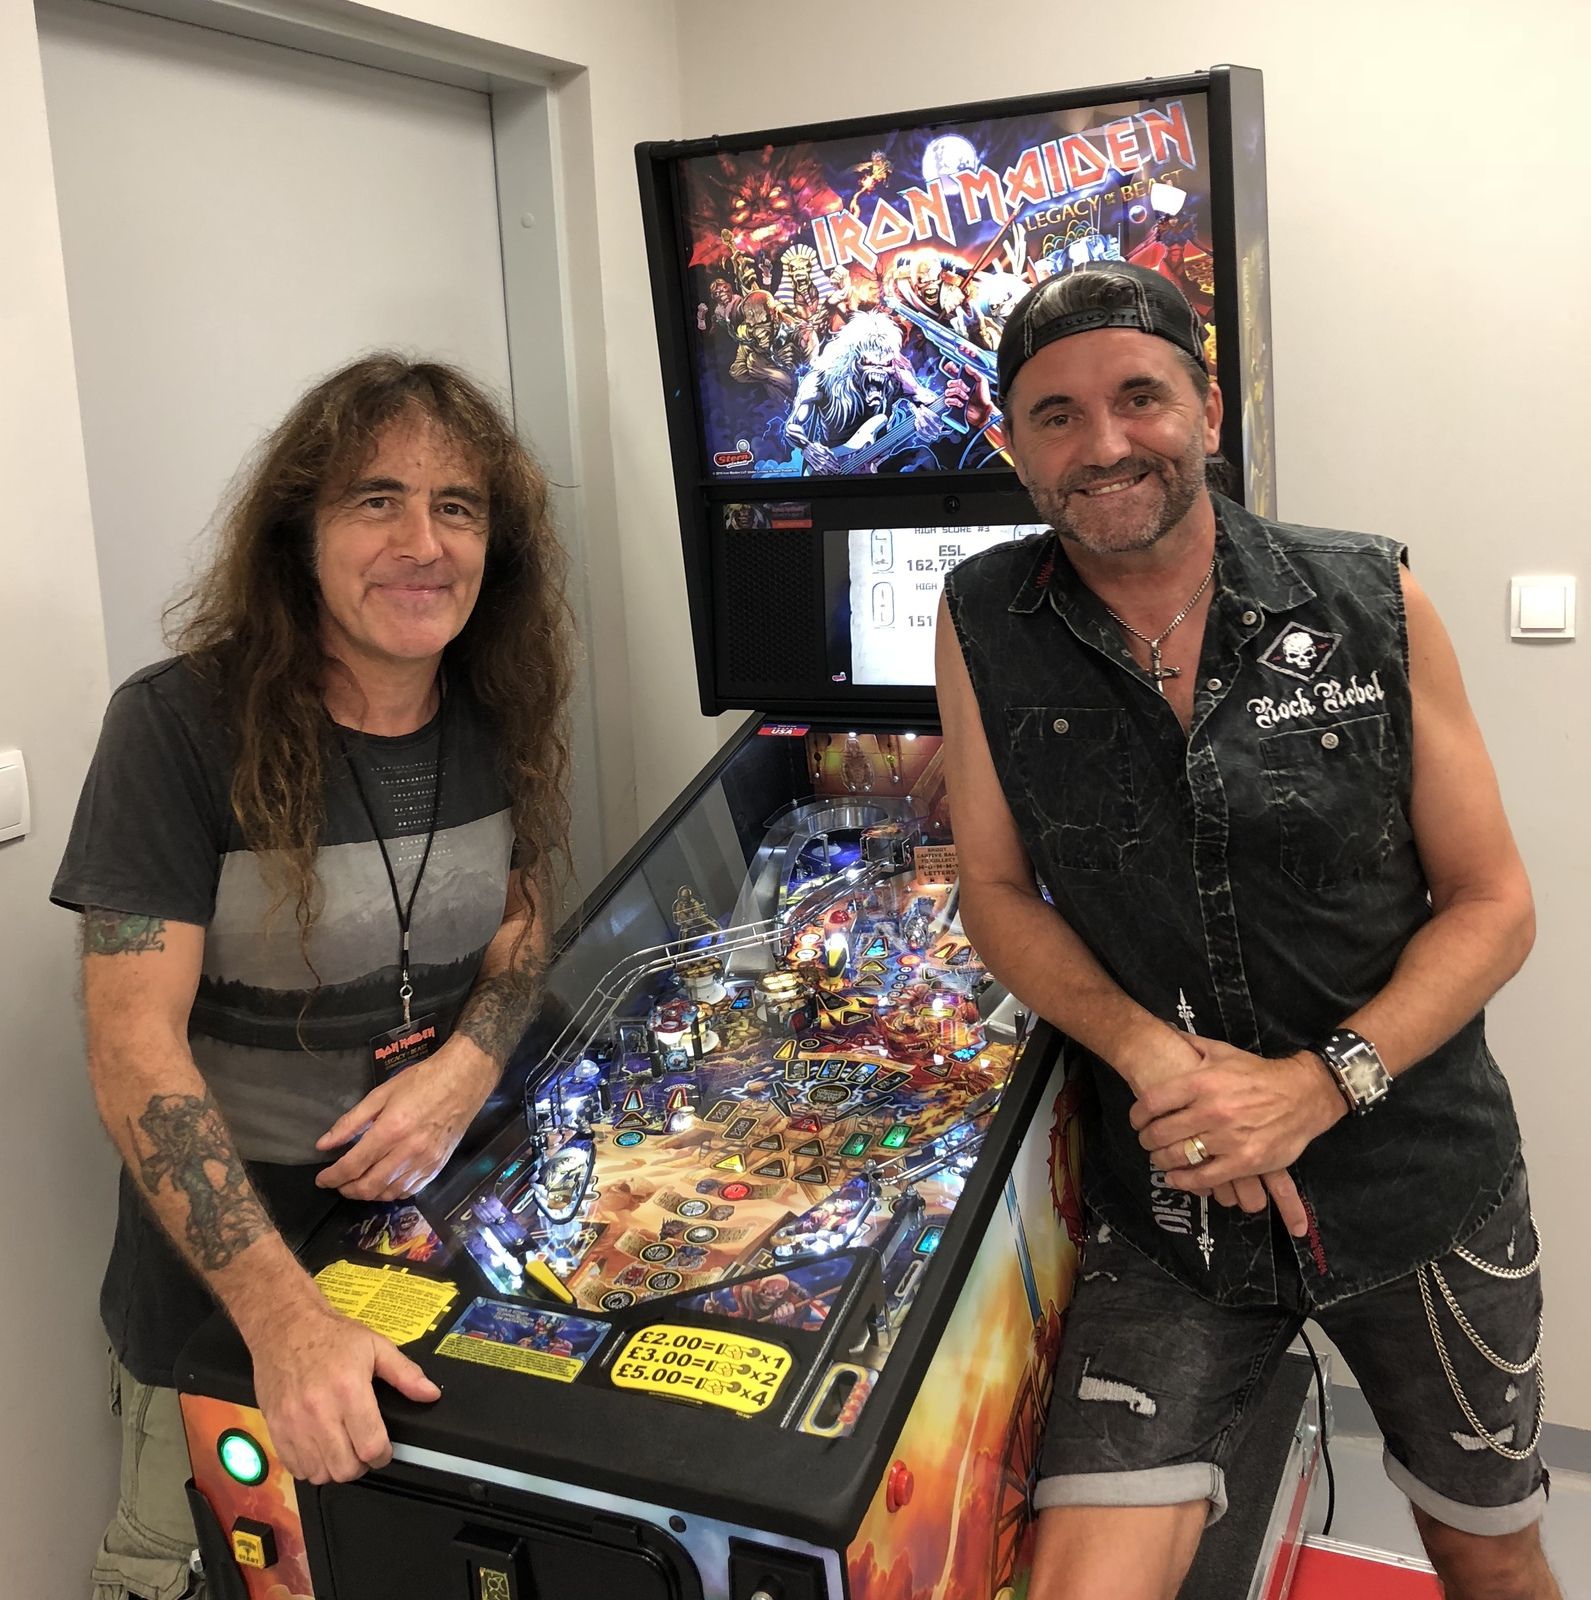 Iron Maiden’s Steve Harris speaks to Planet Rock’s Paul Anthony backstage in Poland